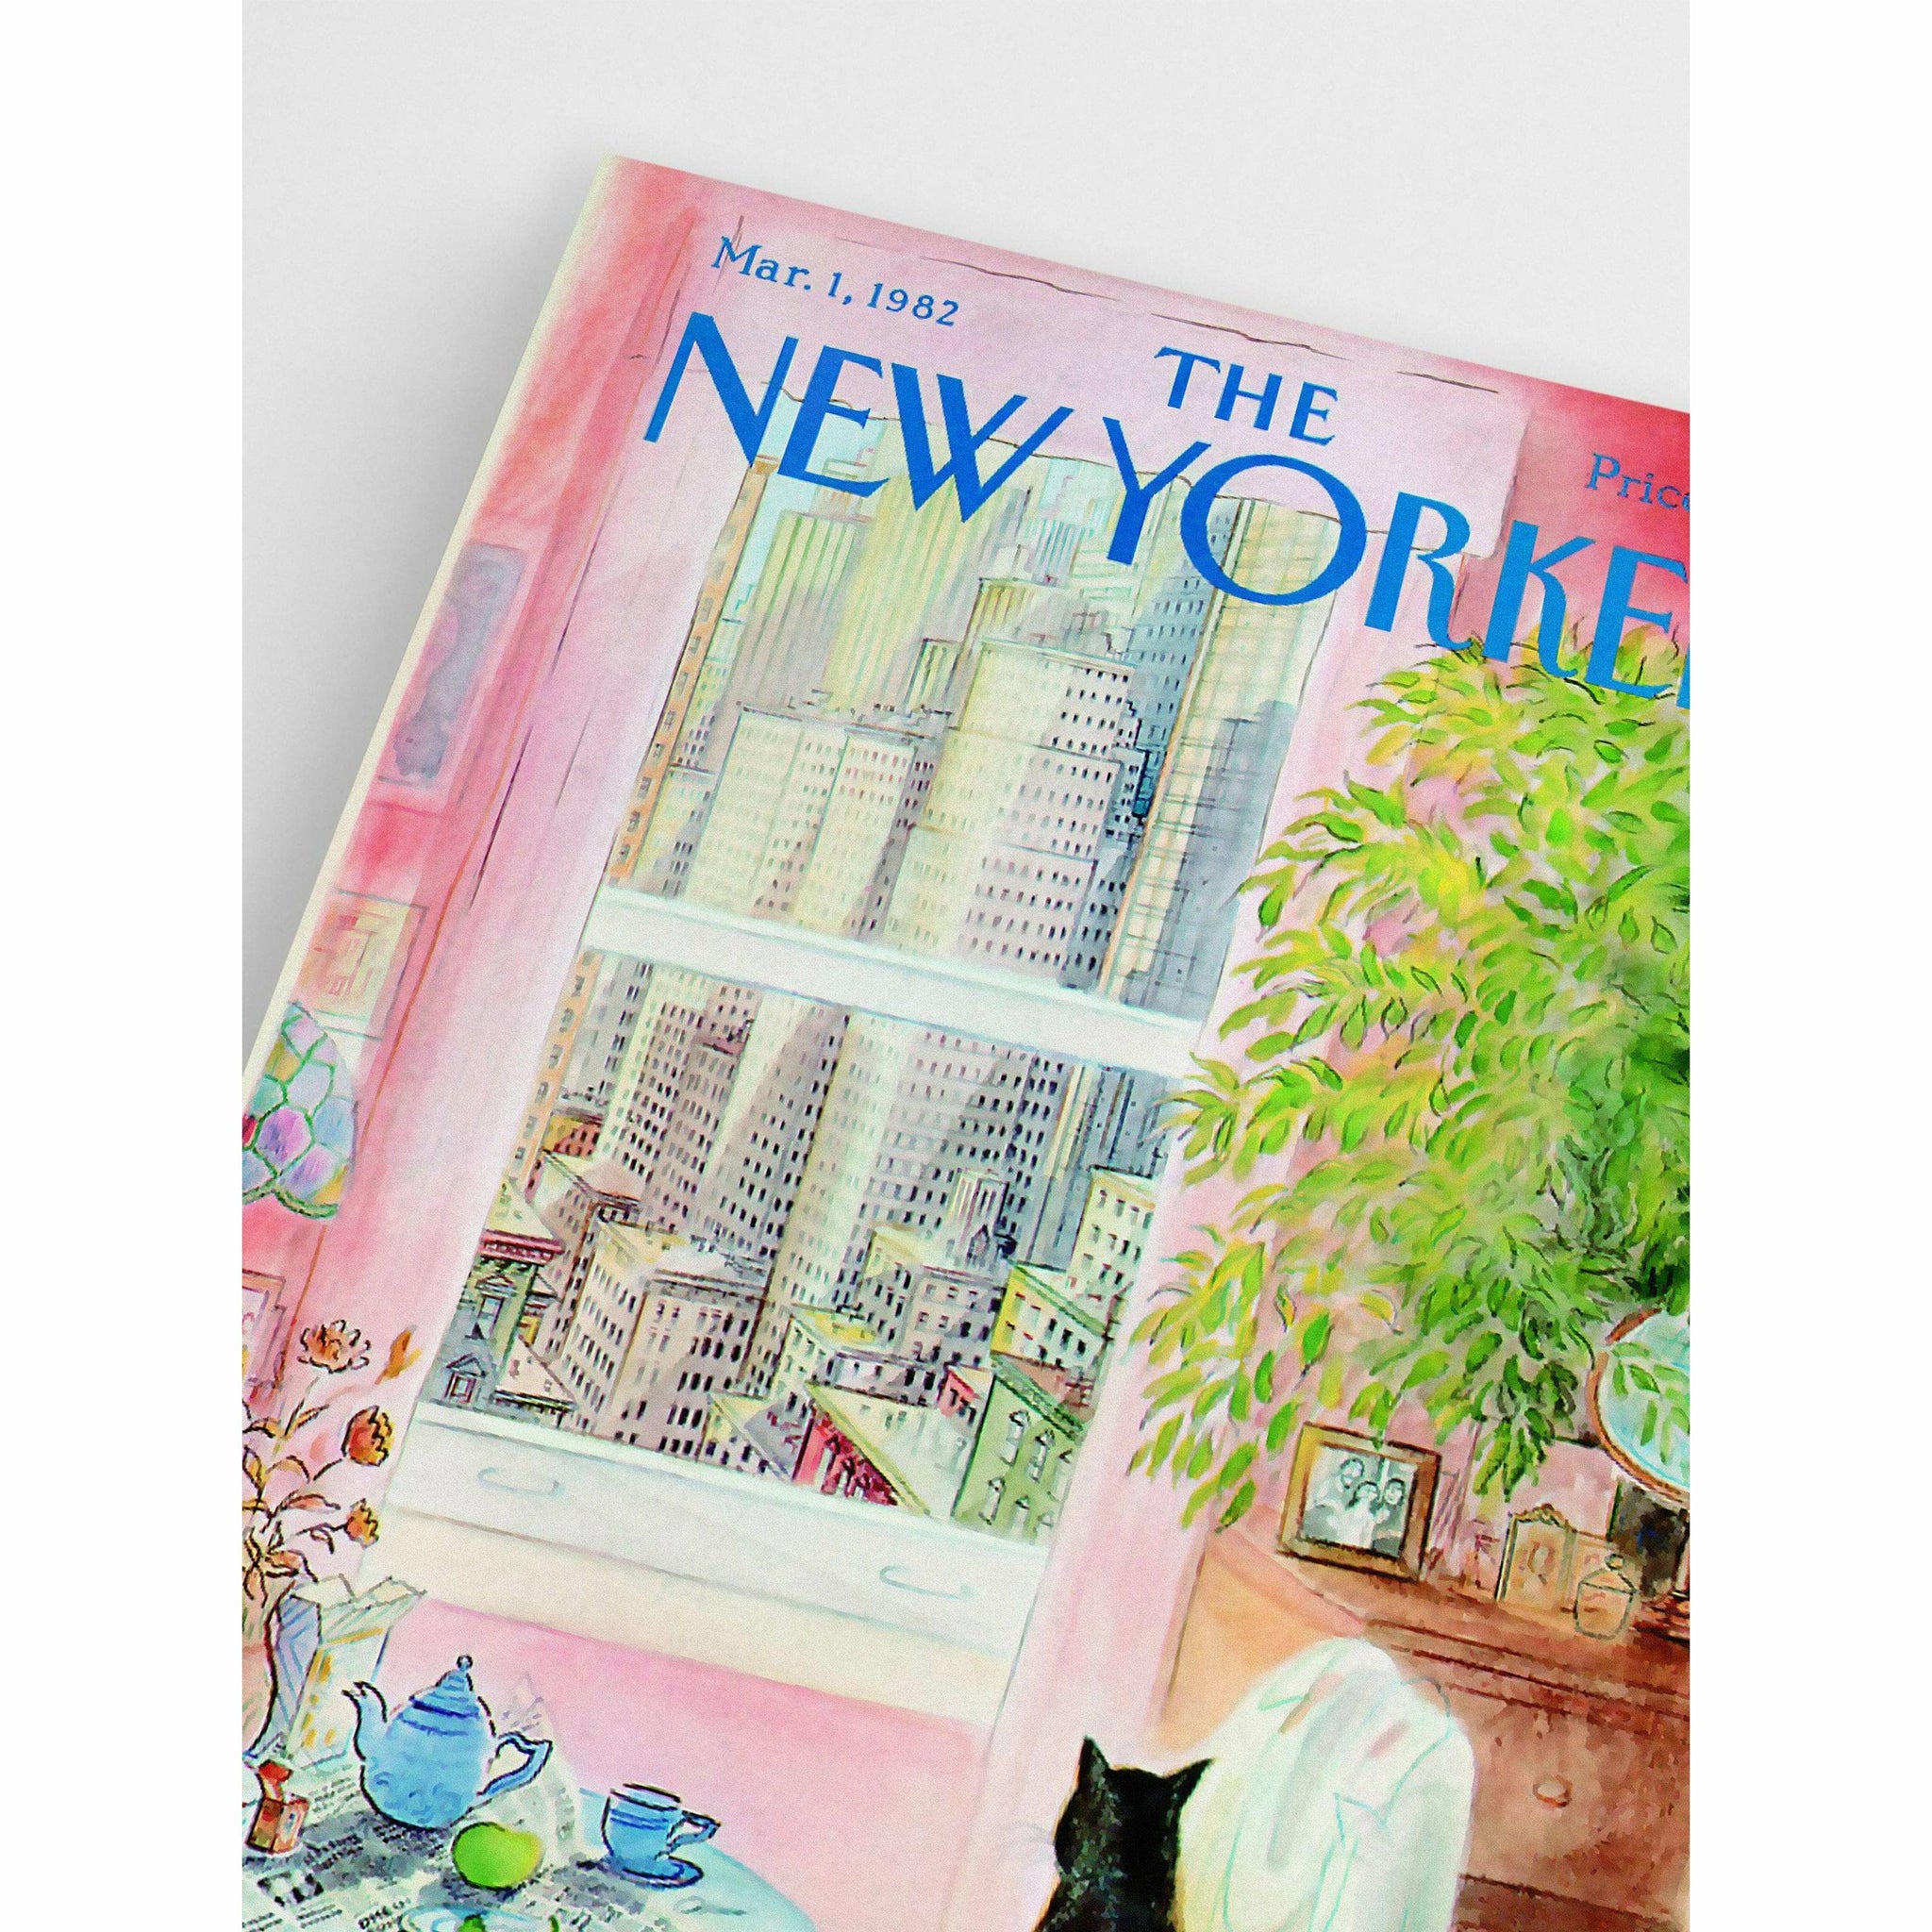 The New Yorker Digital poster 